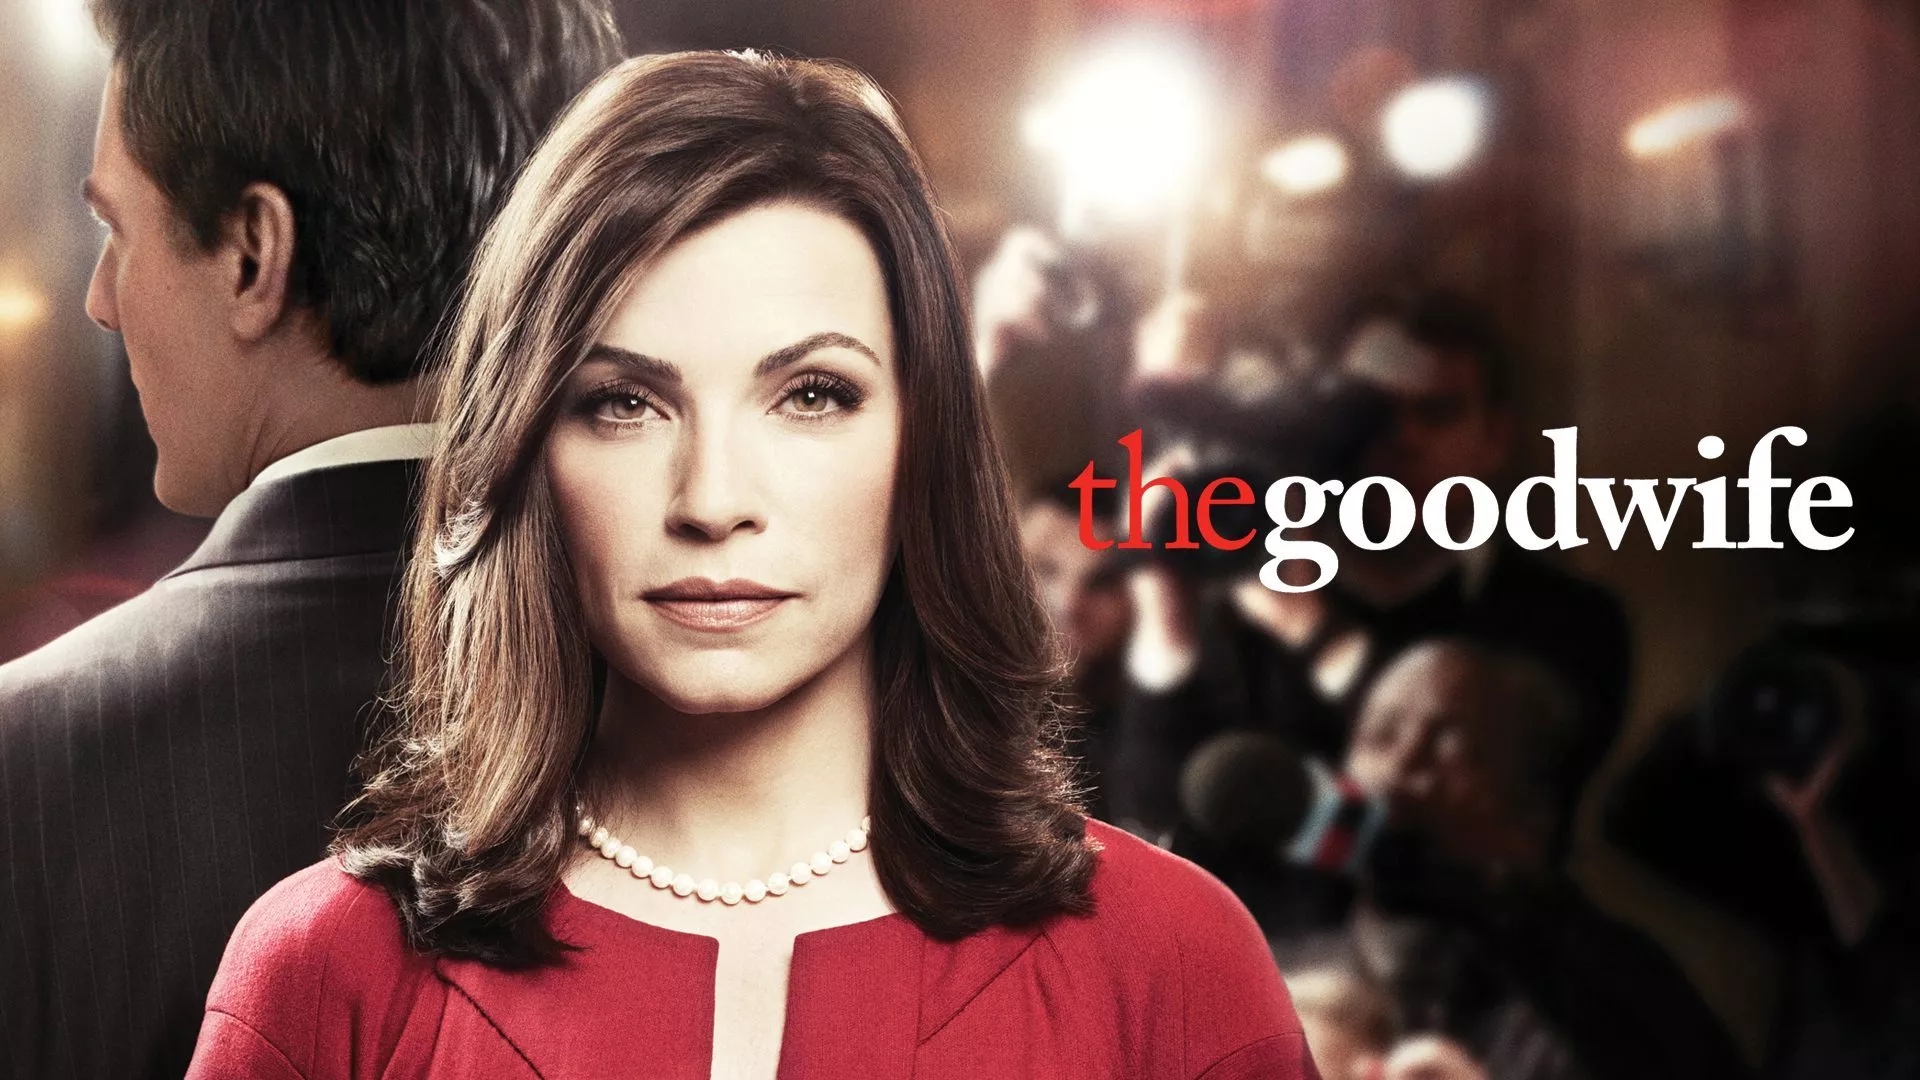 The Good Wife Trailer - The Good Wife Movie Trailer